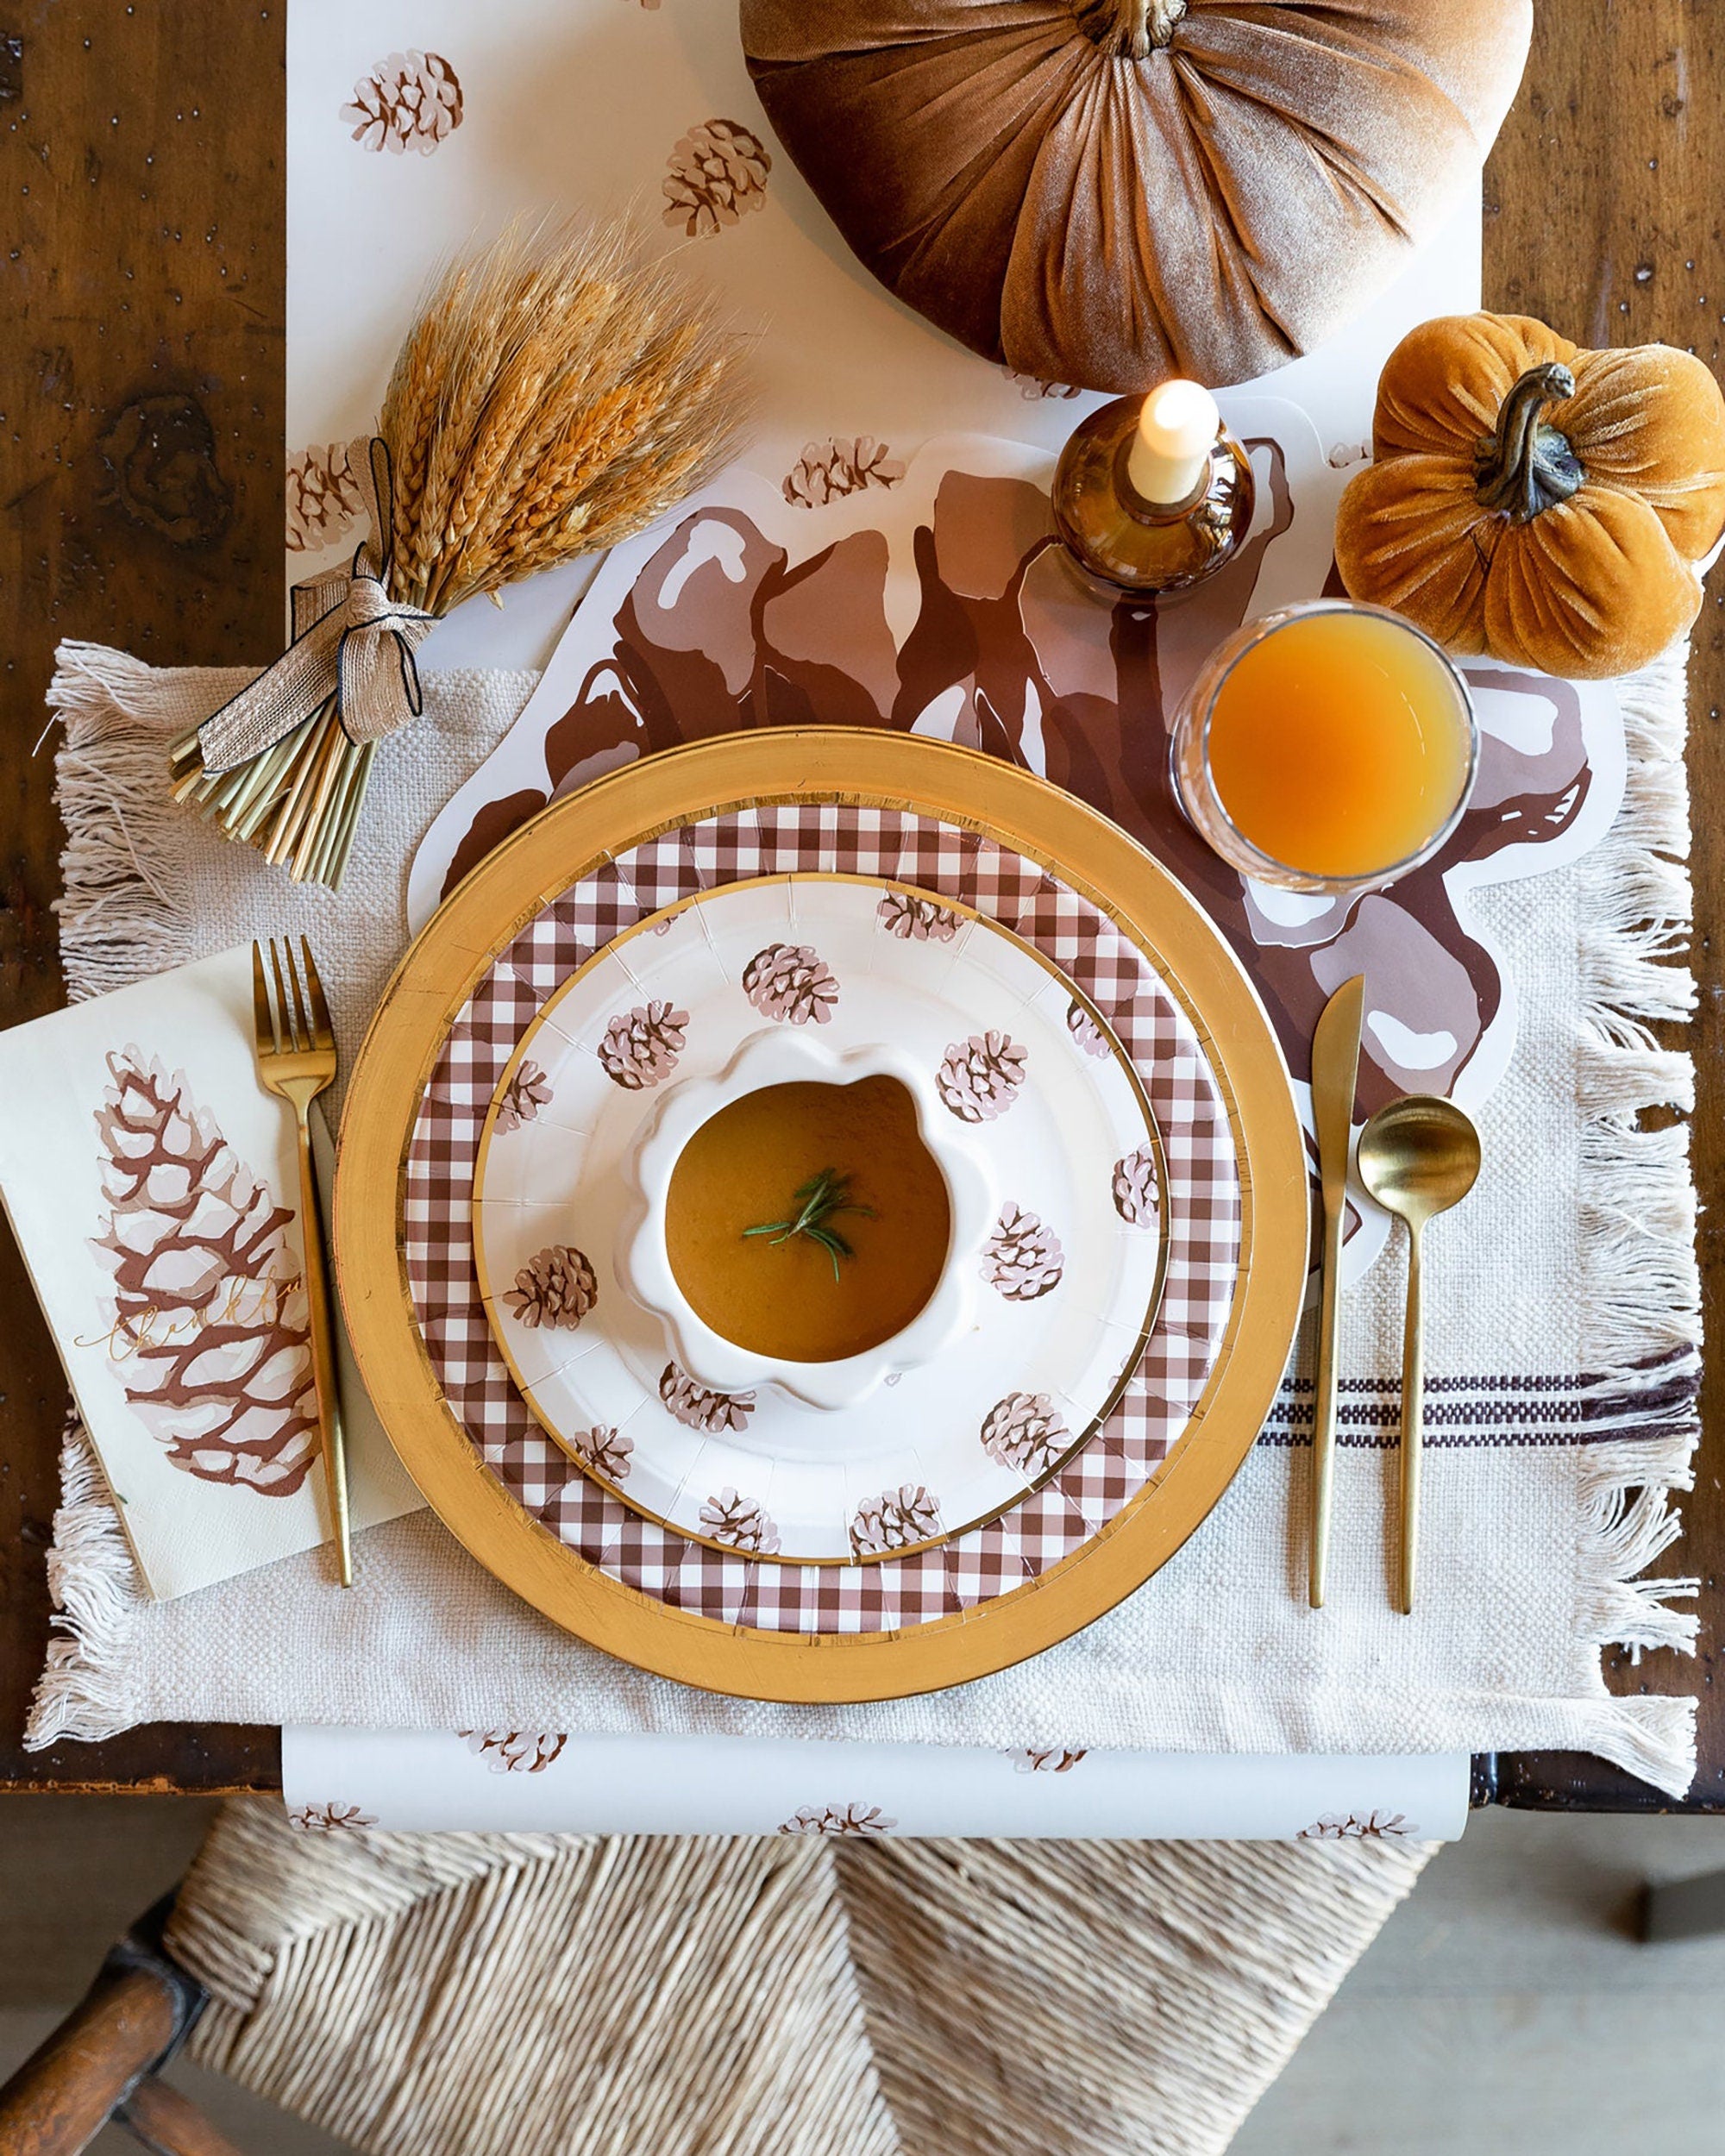 Thanksgiving Paper Napkins | Fall Napkins - Fall Paper Napkins - Thanksgiving Napkins - Thankful Napkins - Fall Theme Party - Pinecones